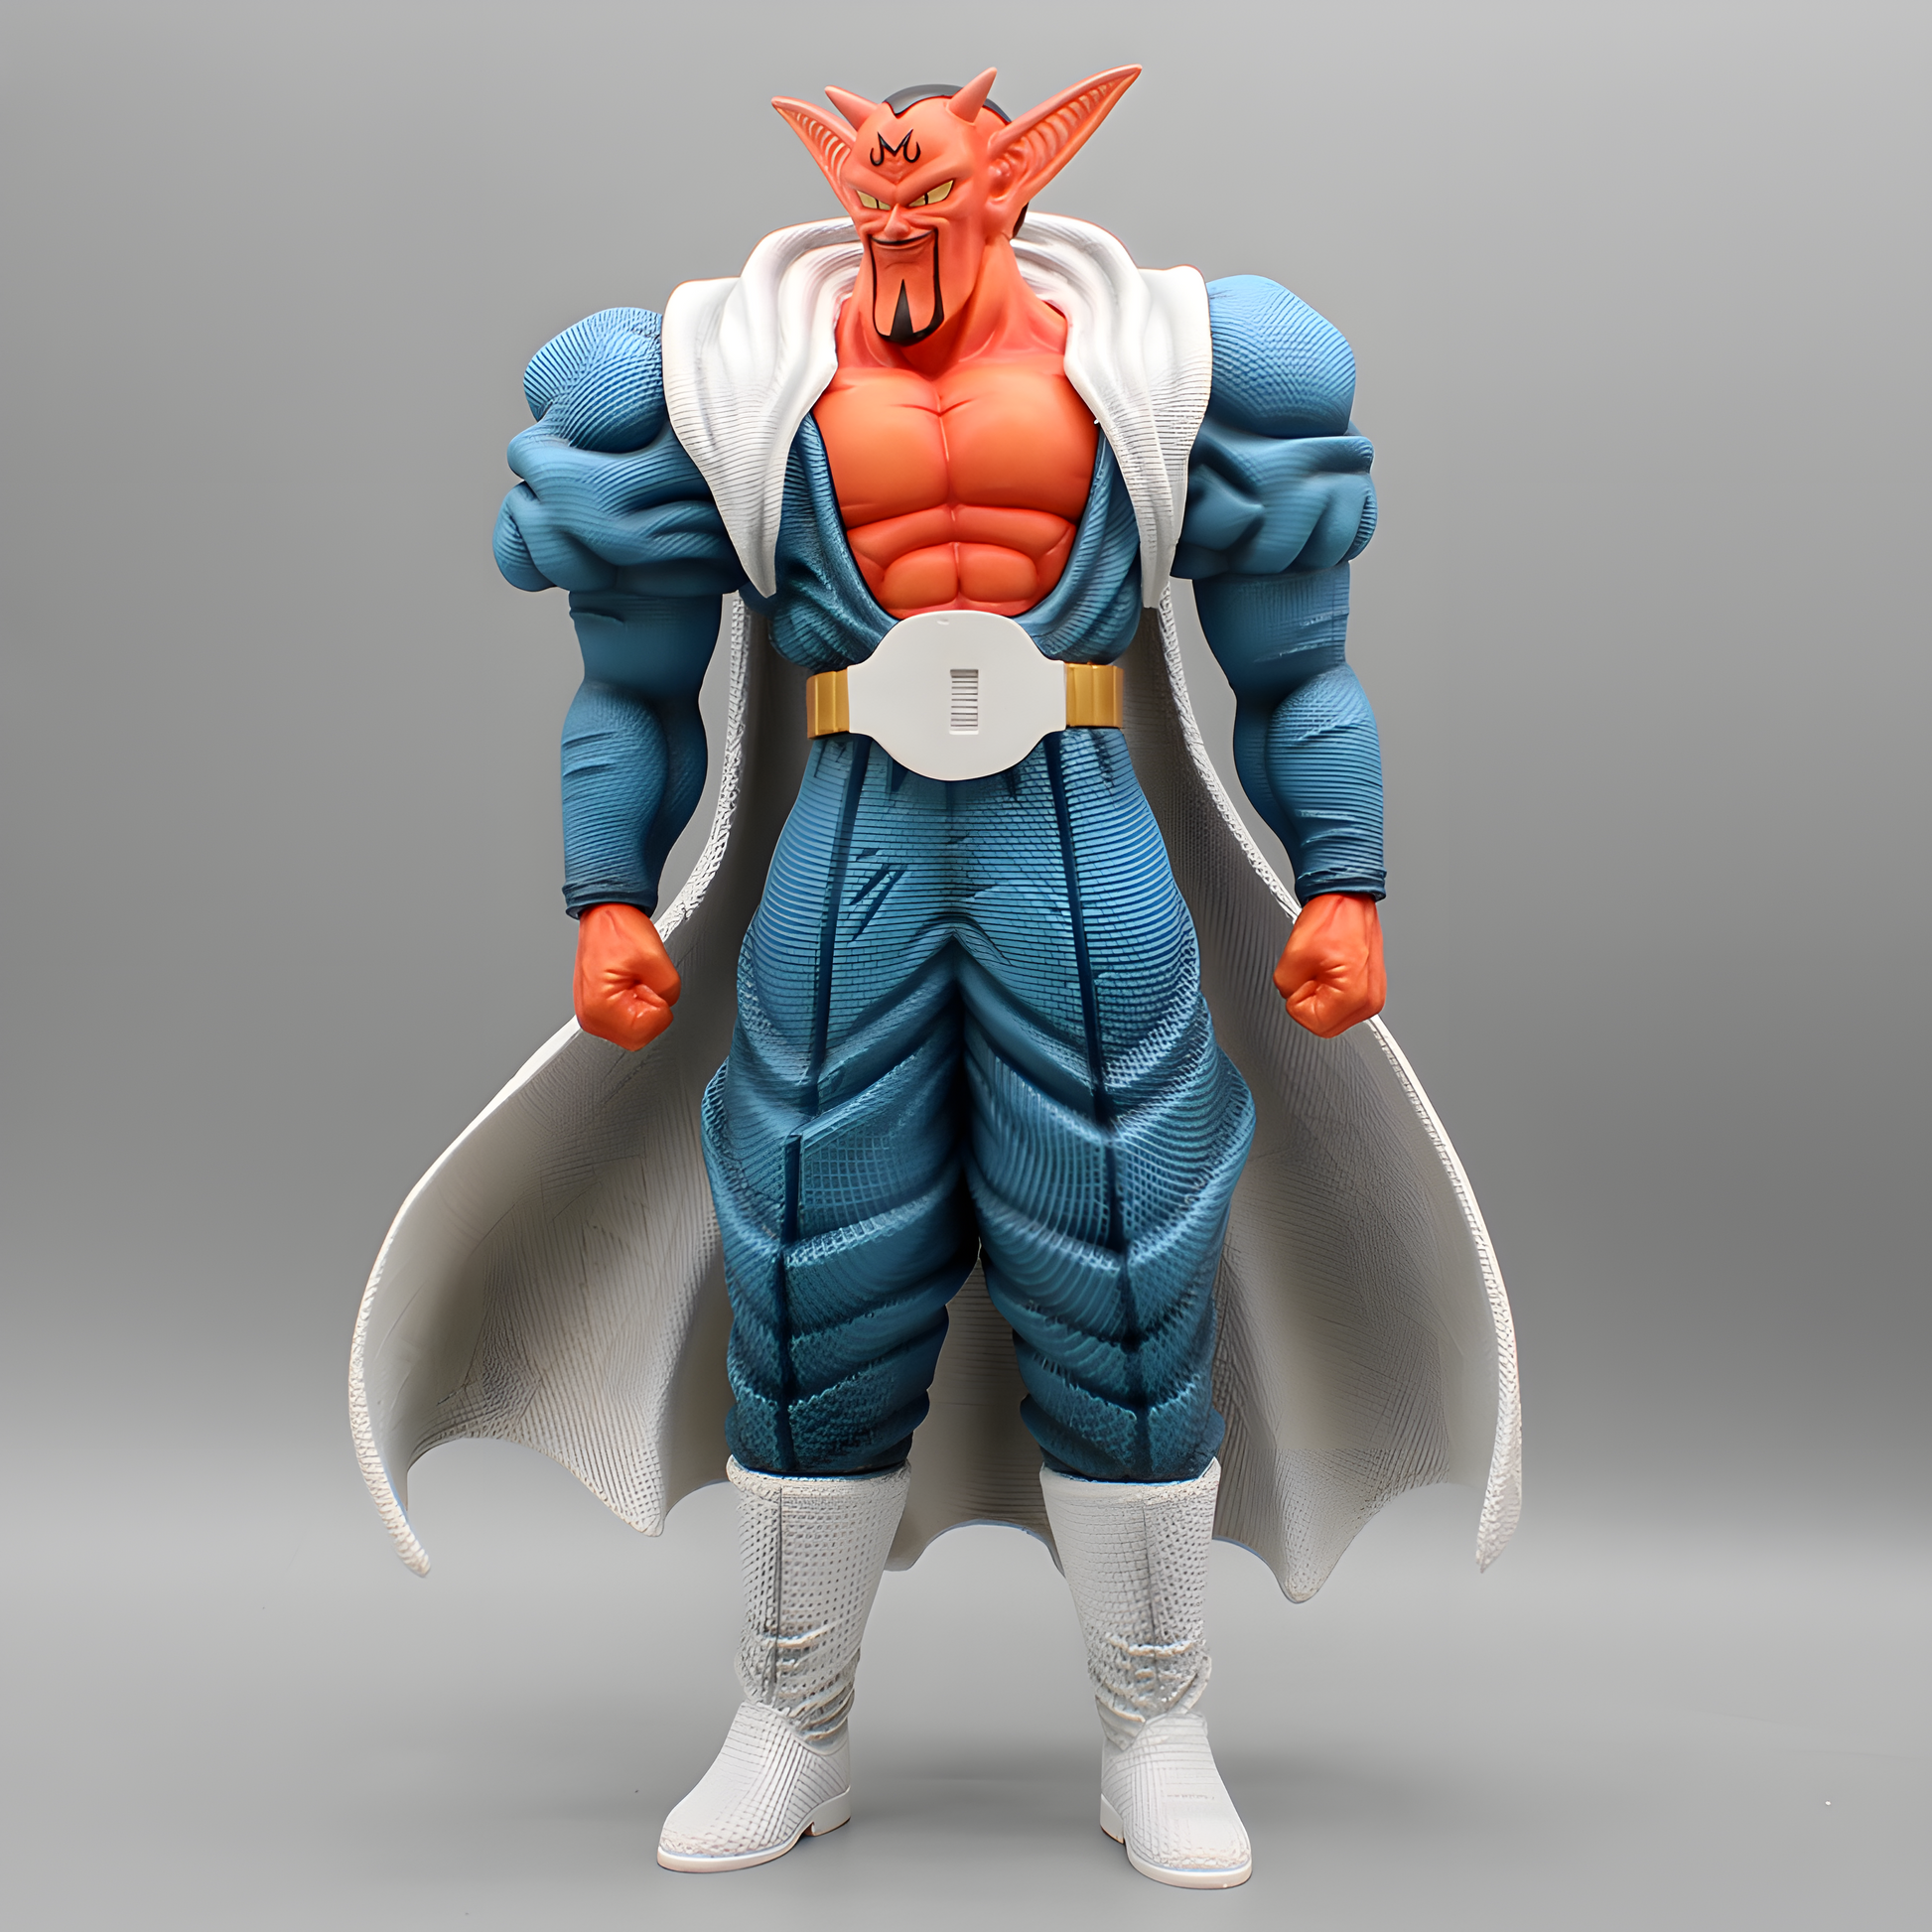 Rear view of the imposing Dabura collectible figure, highlighting the flow of his white cape and the intricacies of his blue demon attire.